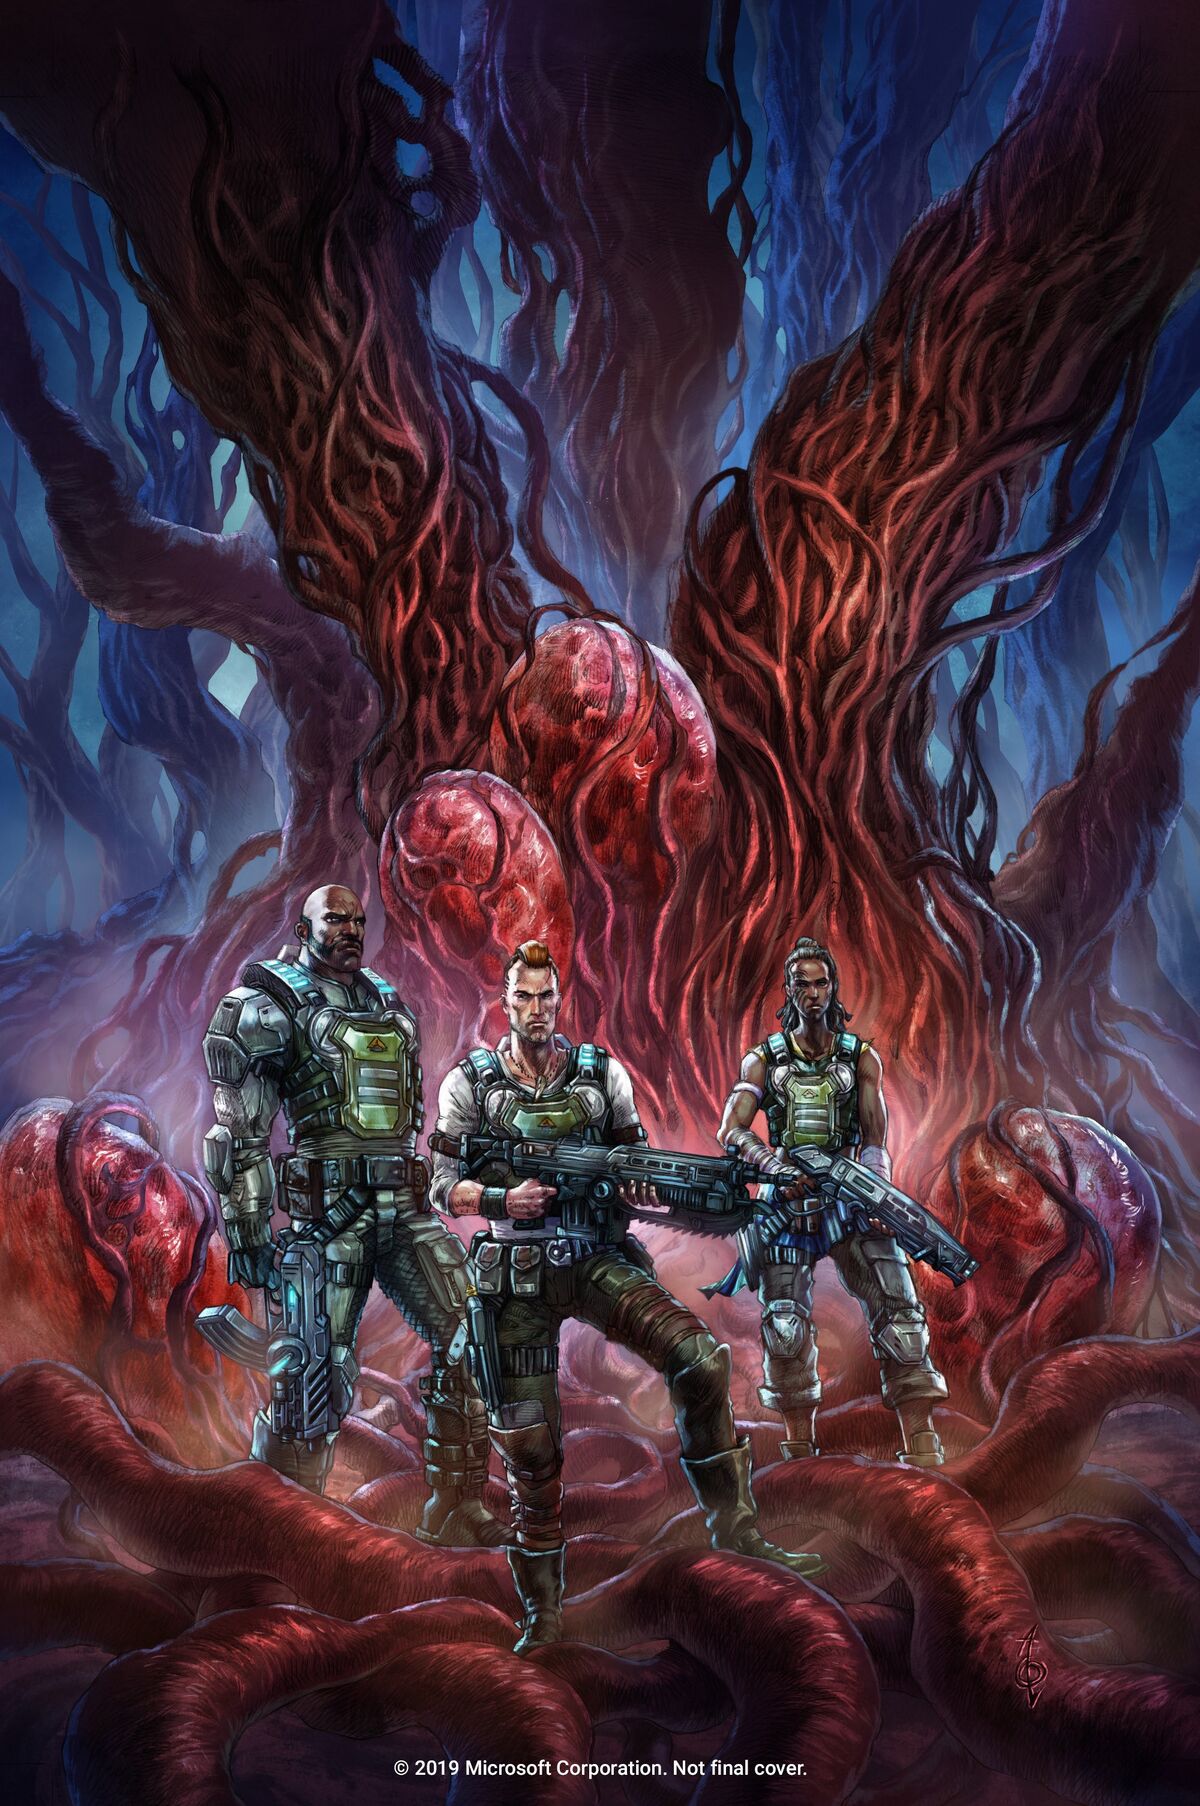 The Outerhaven's Gears 5: Hivebusters Review